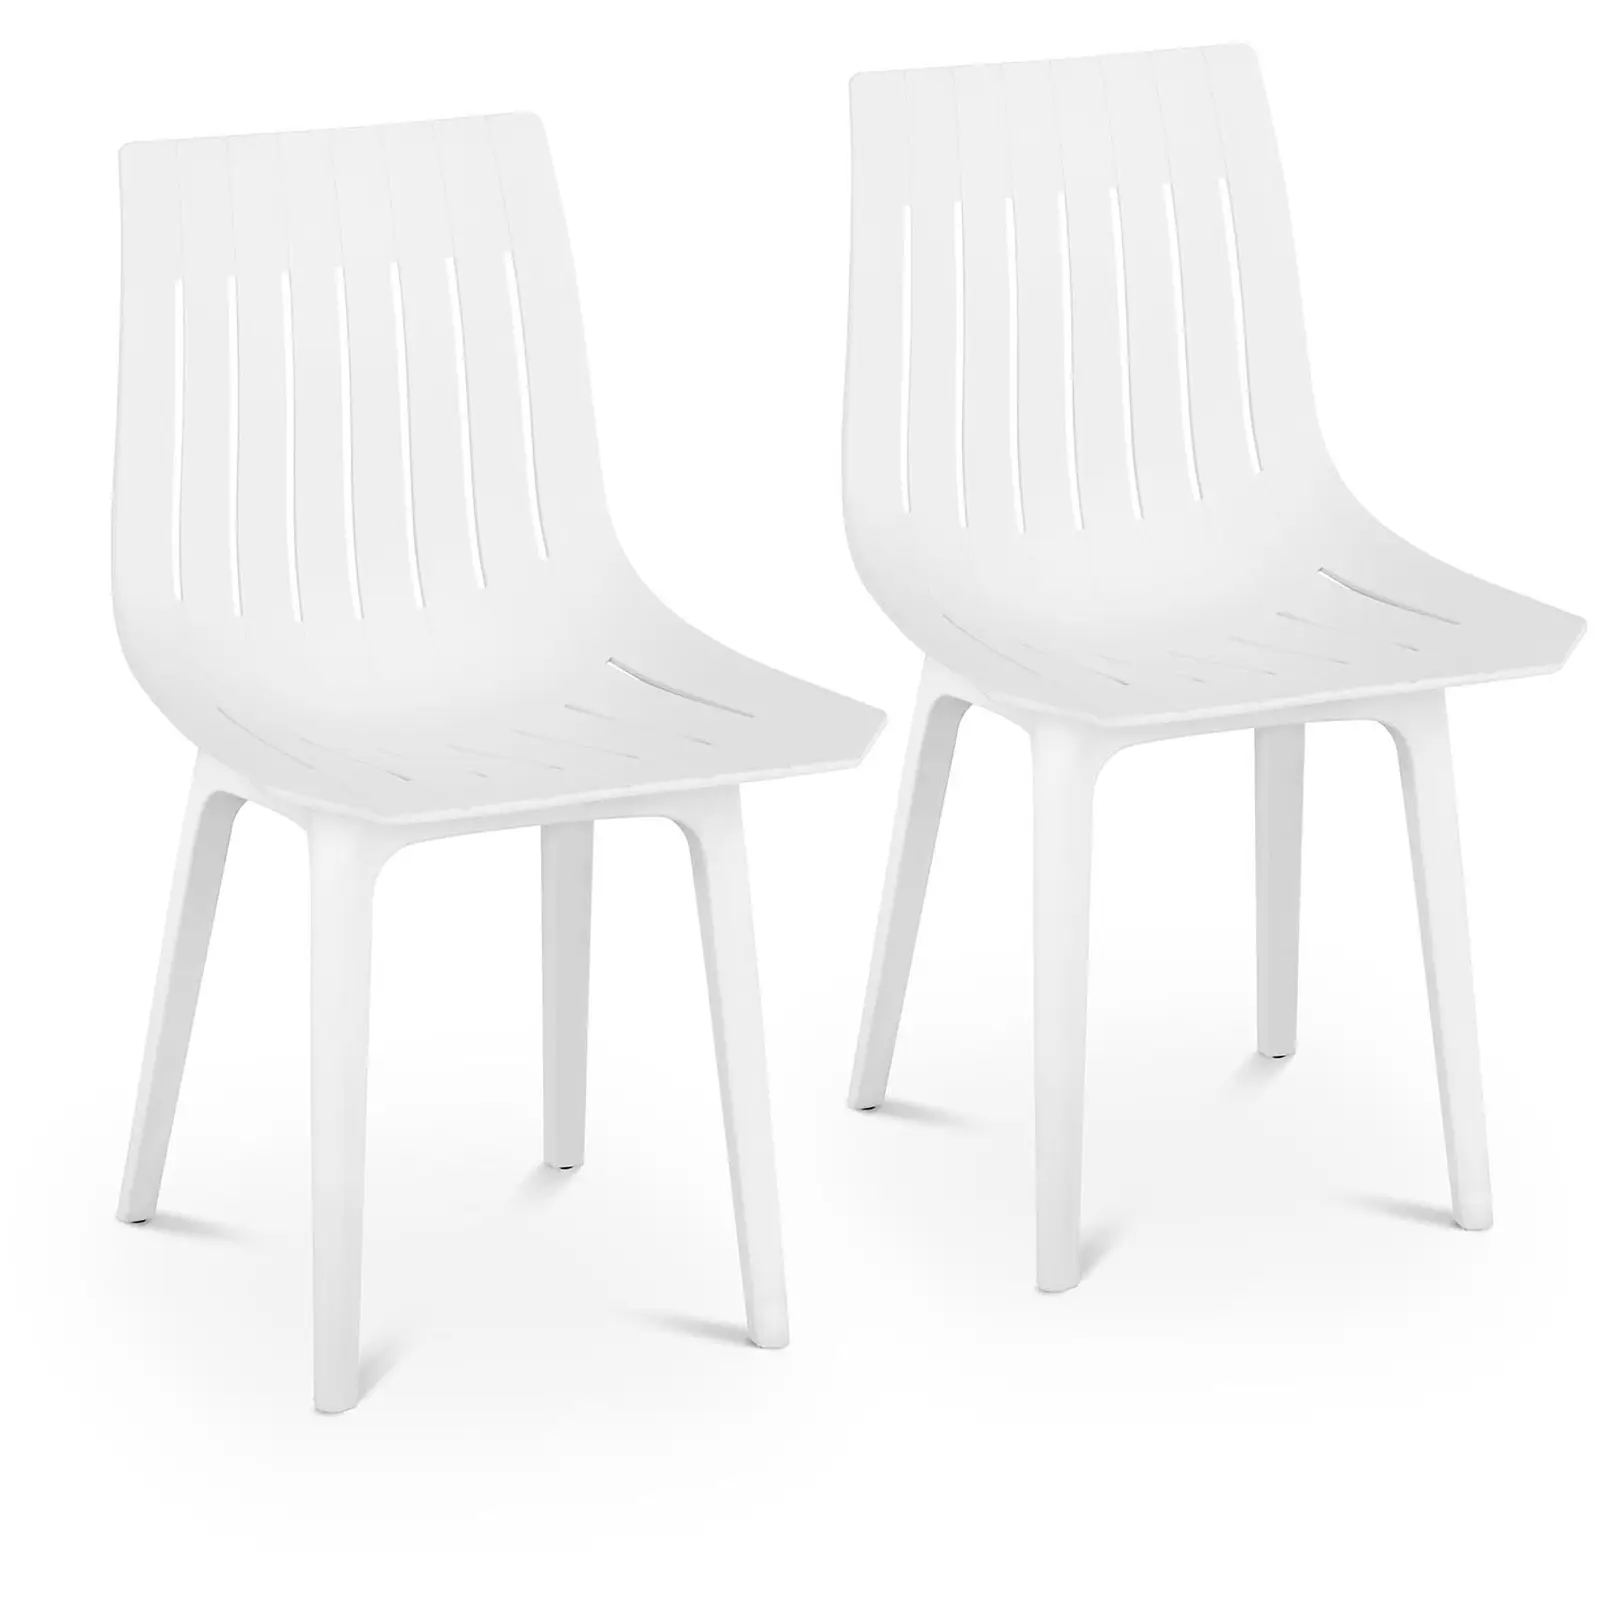 Chair - set of 2 - up to 150 kg - seat 47 x 42 cm - white